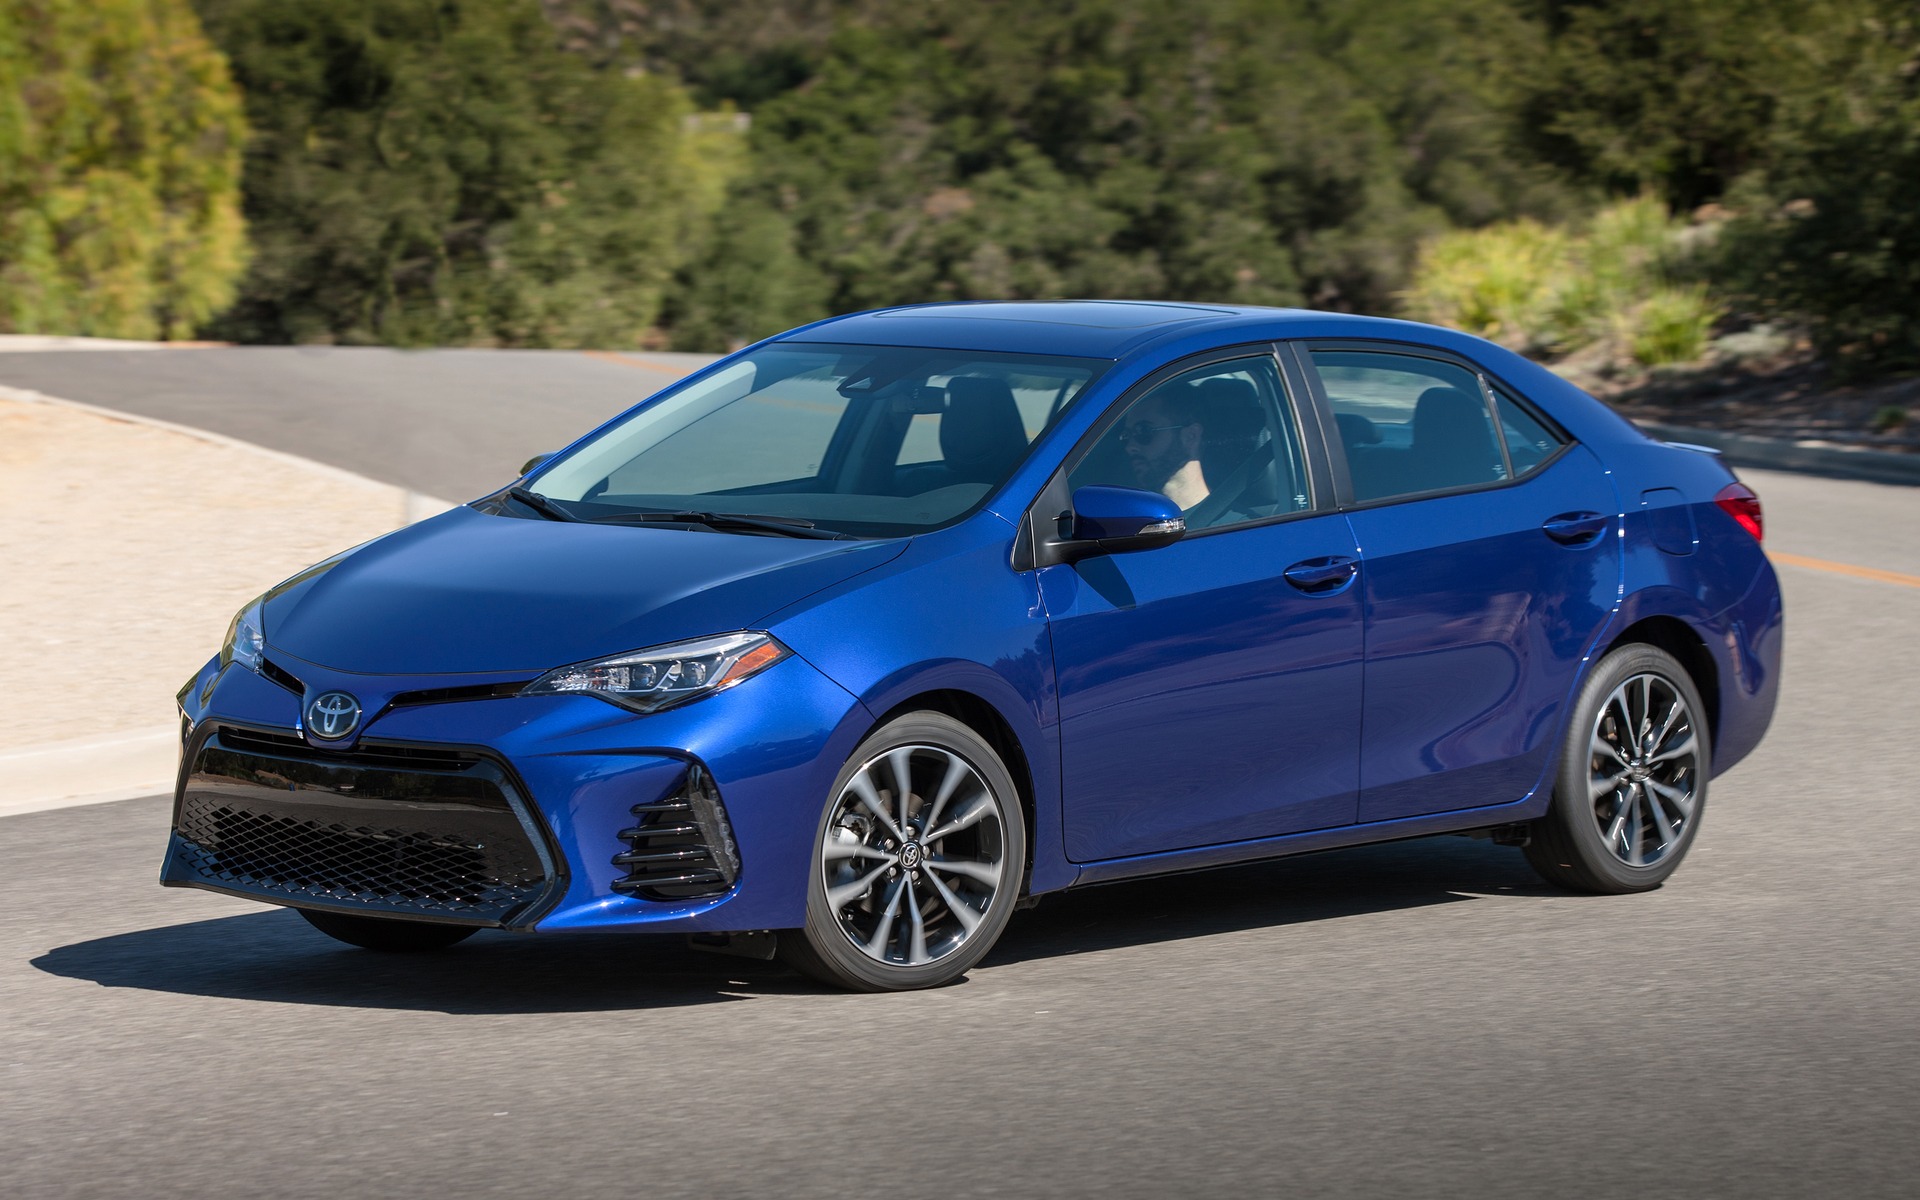 2019 Toyota Corolla Preview - The Car Guide